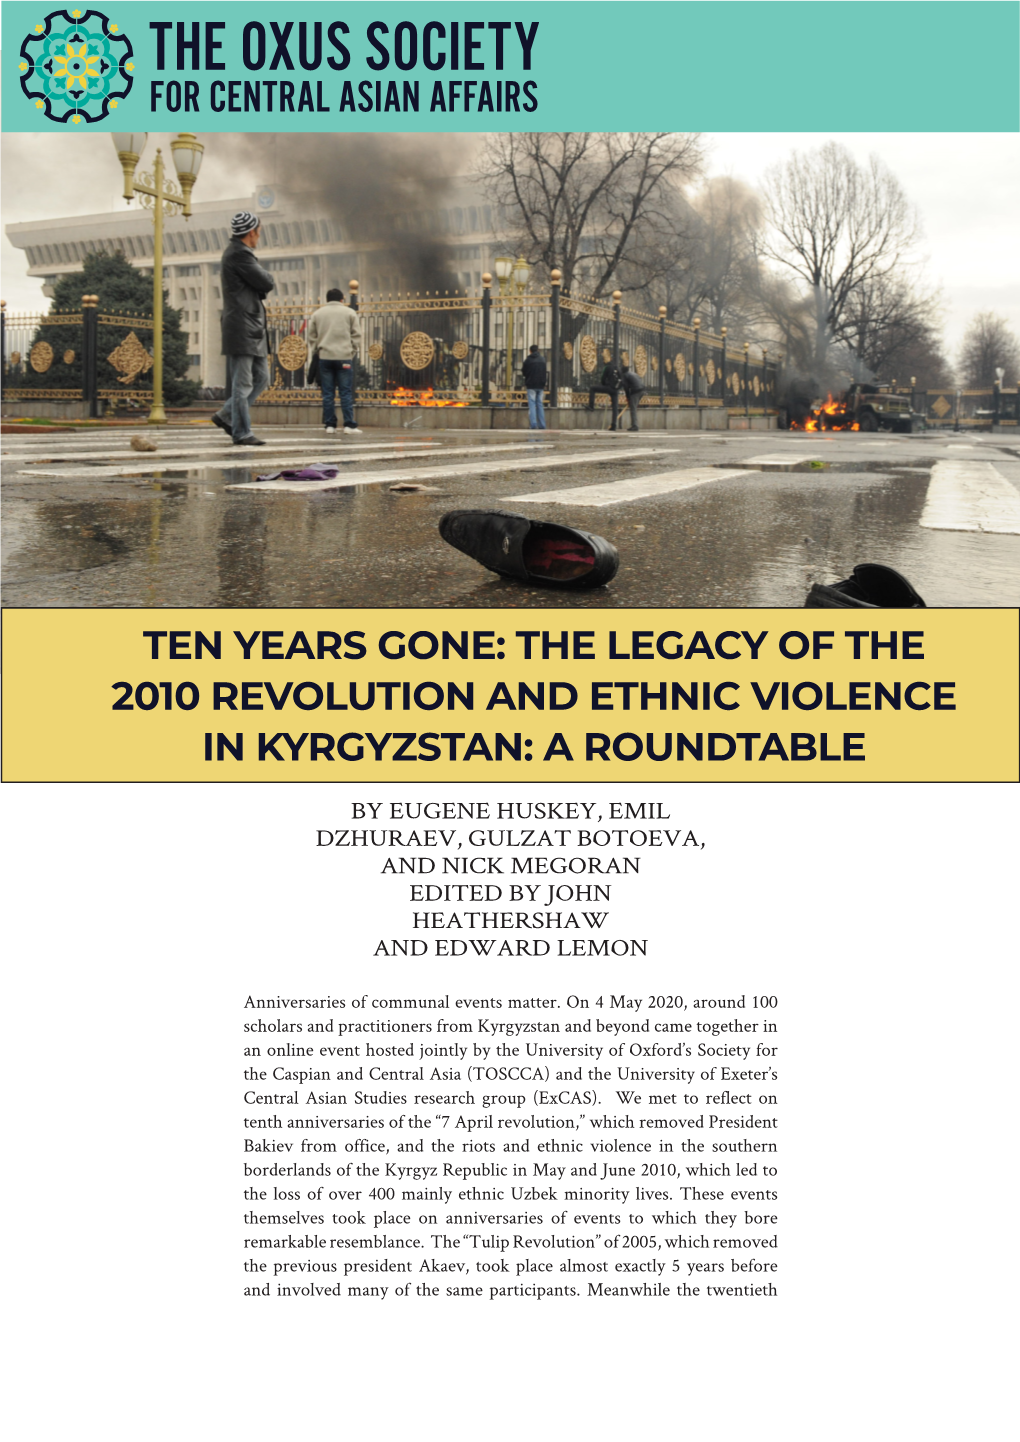 The Legacy of the 2010 Revolution and Ethnic Violence in Kyrgyzstan: a Roundtable